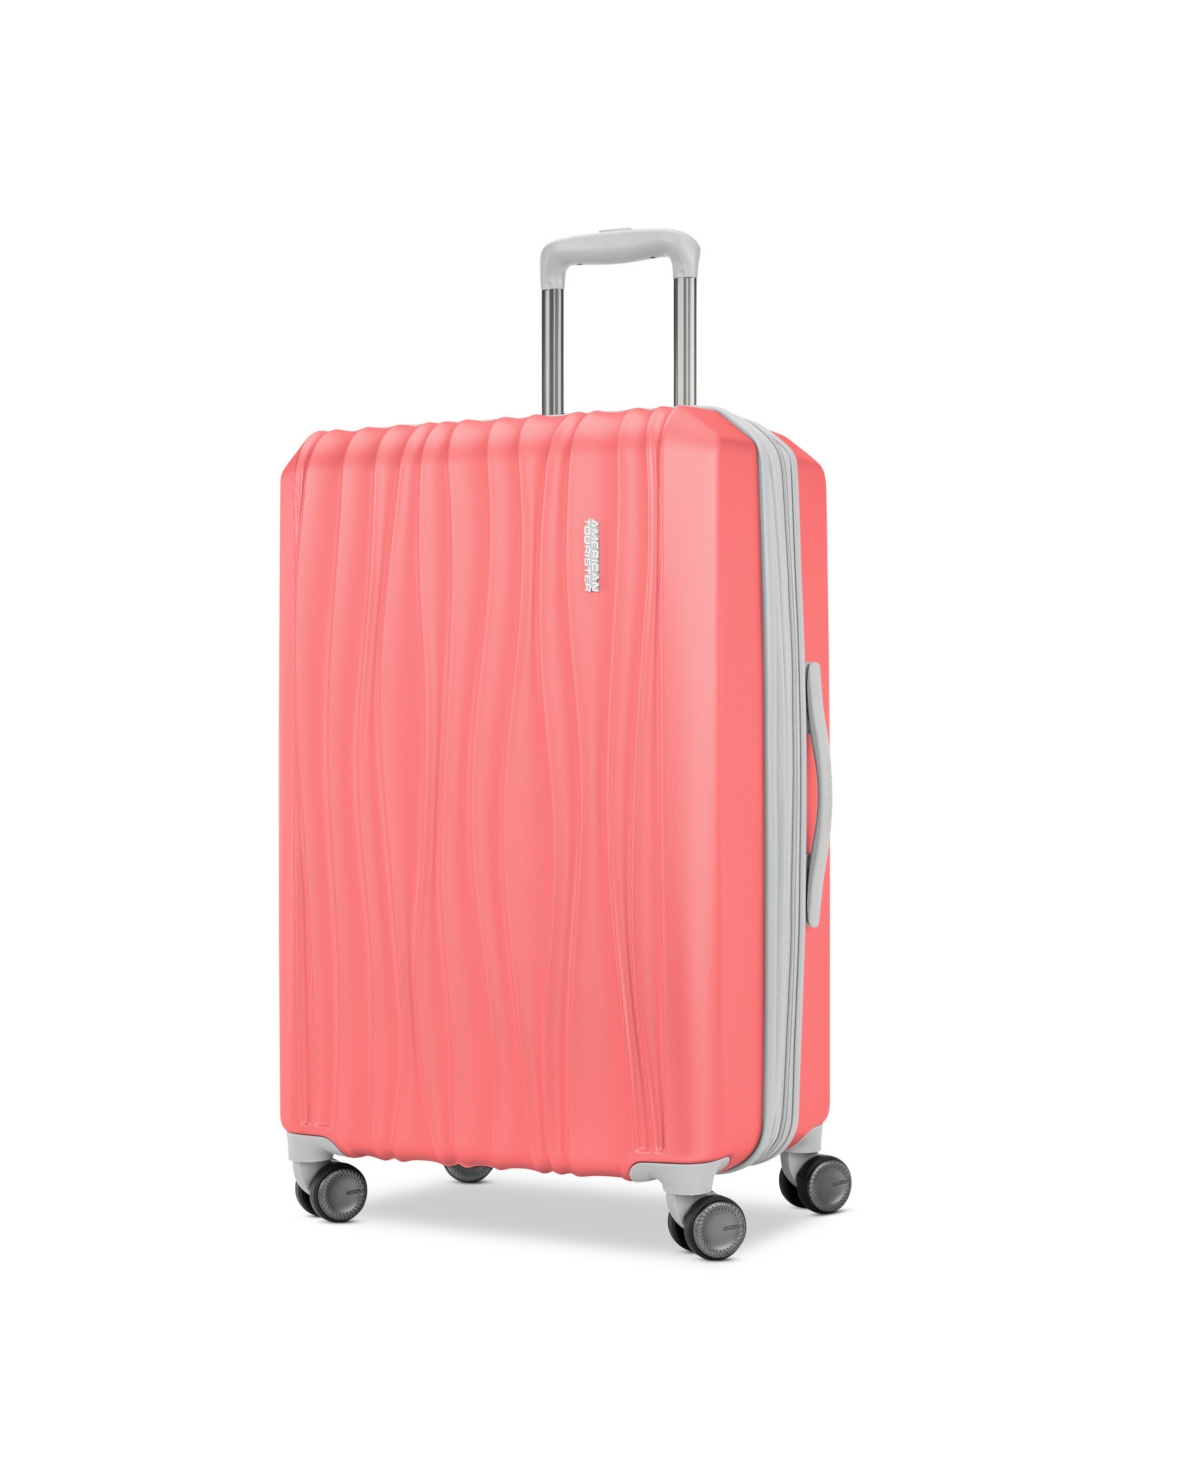 American Tourister Tribute Encore Hardside Check-in 24" Spinner Luggage In Soft Coral